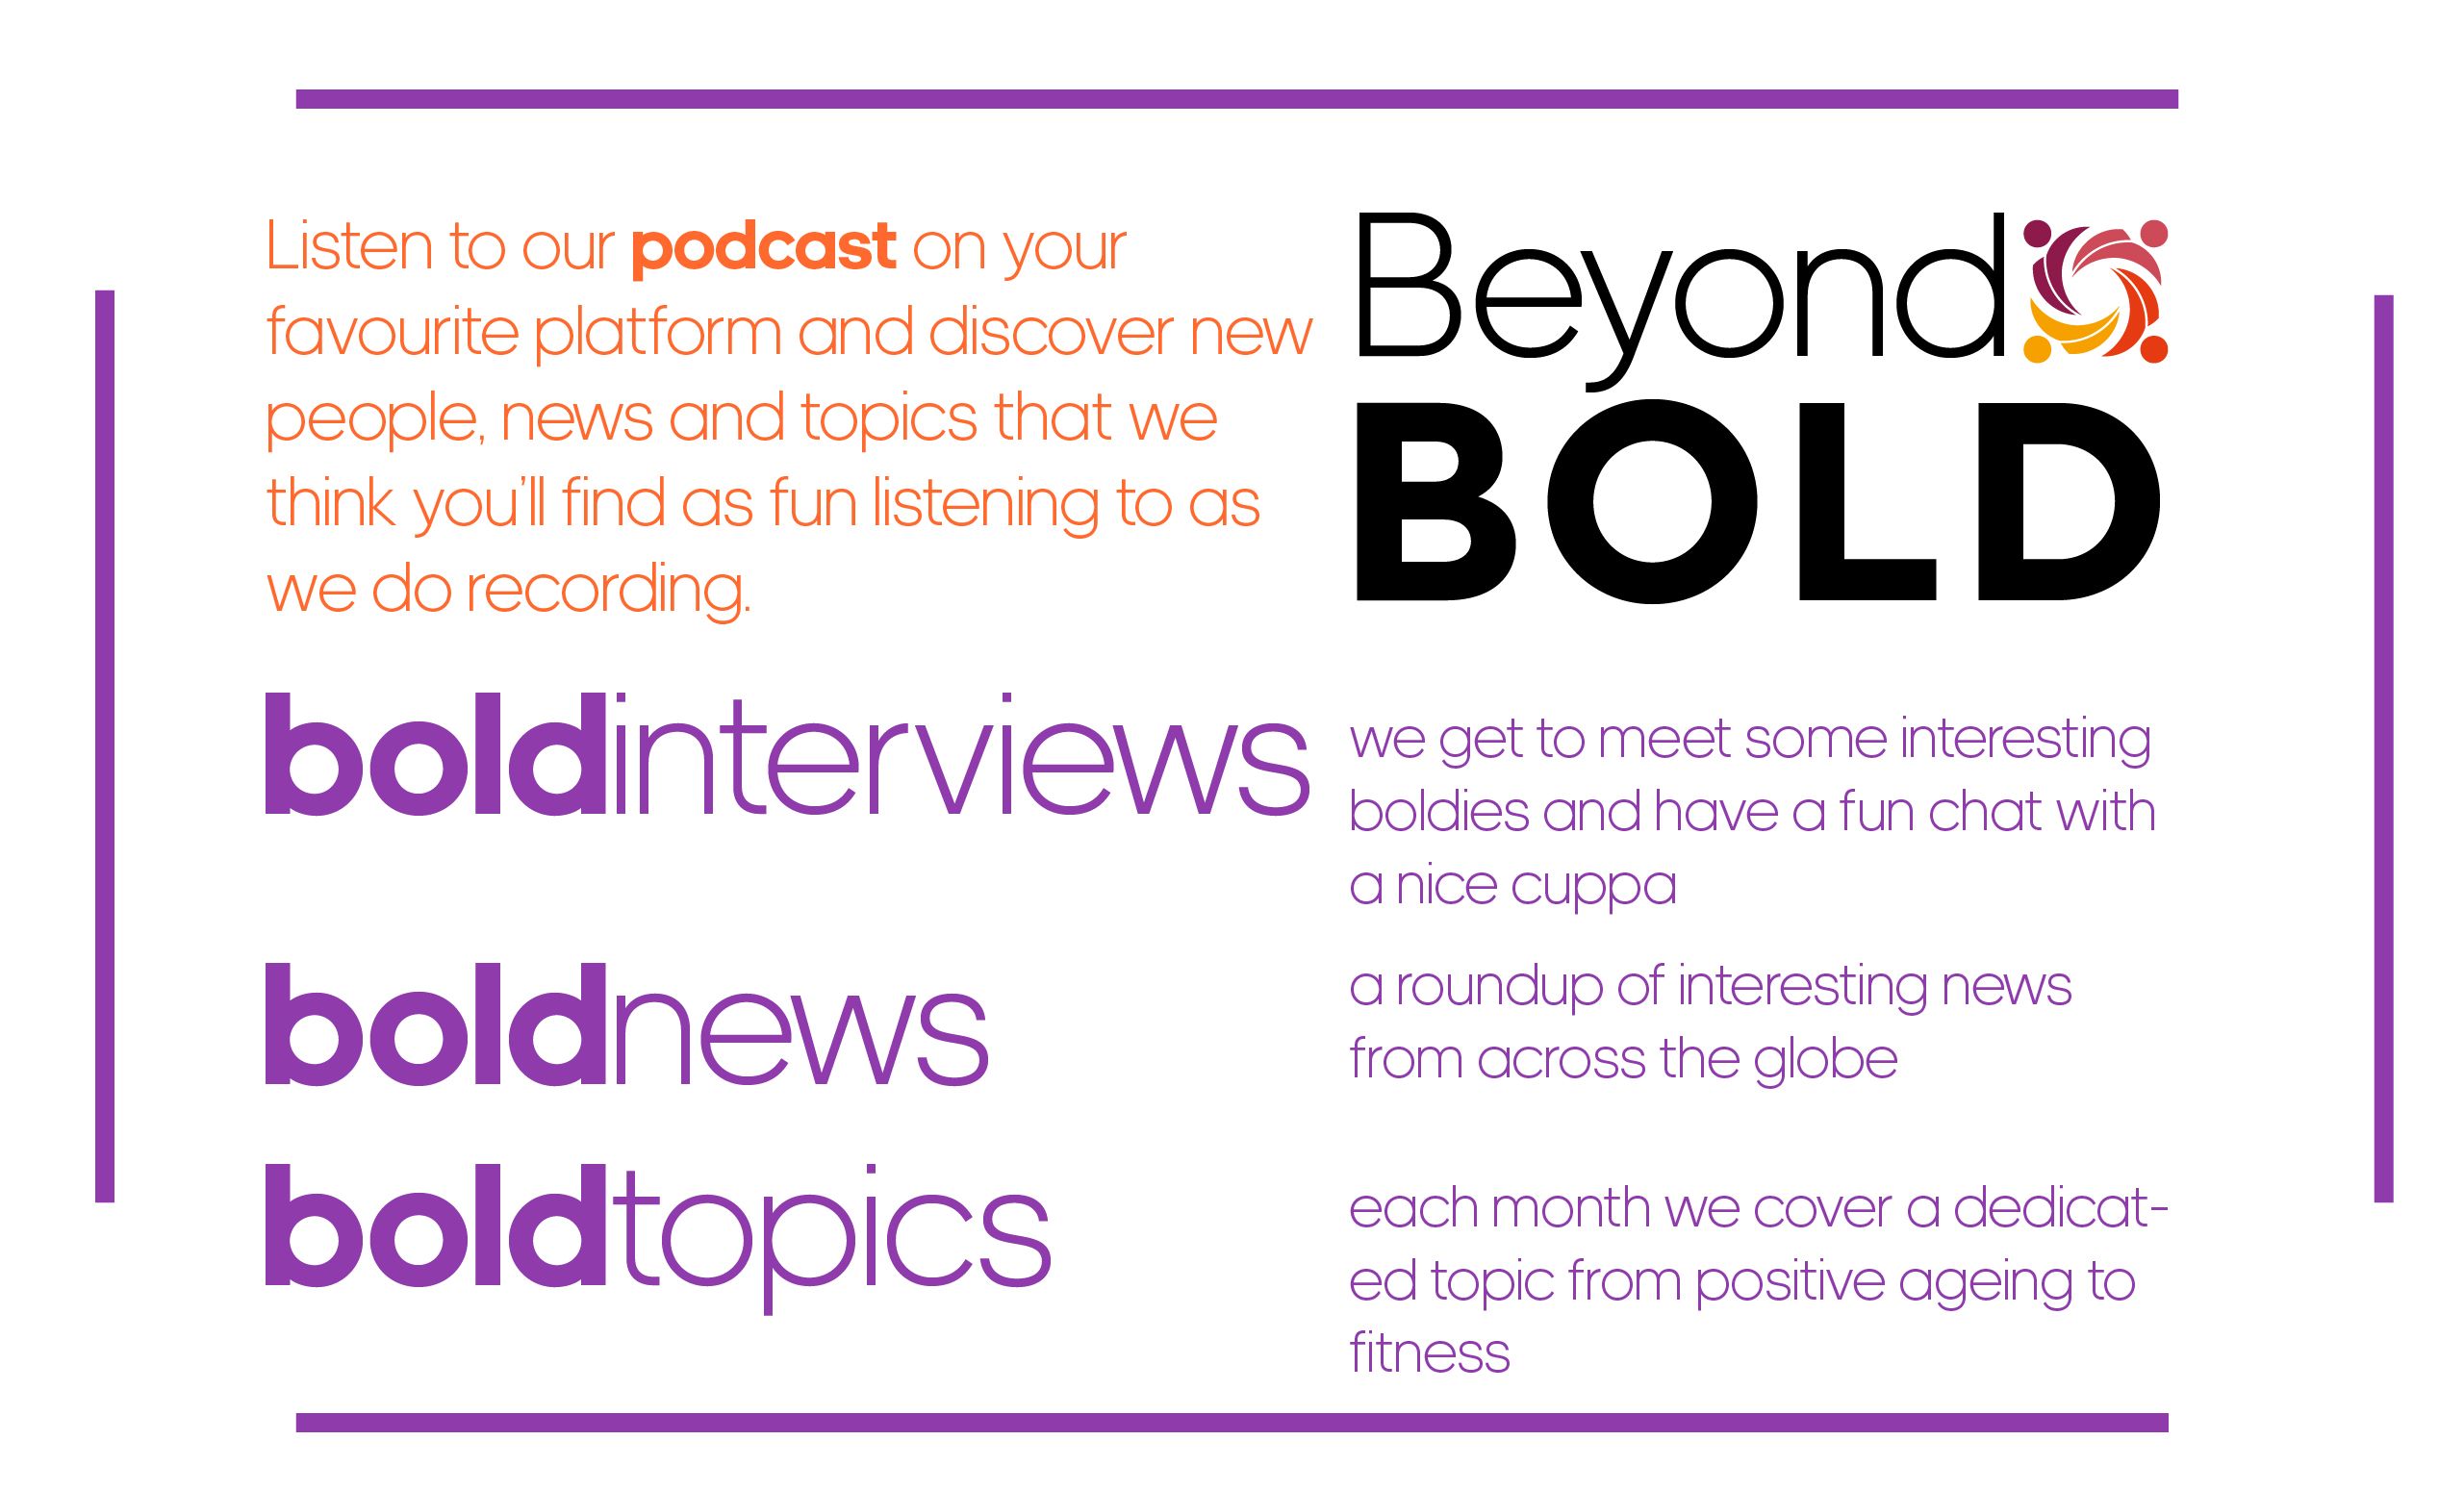 BoldInterview – Dave Carr from Guys and St Thomas’ Hospital in London